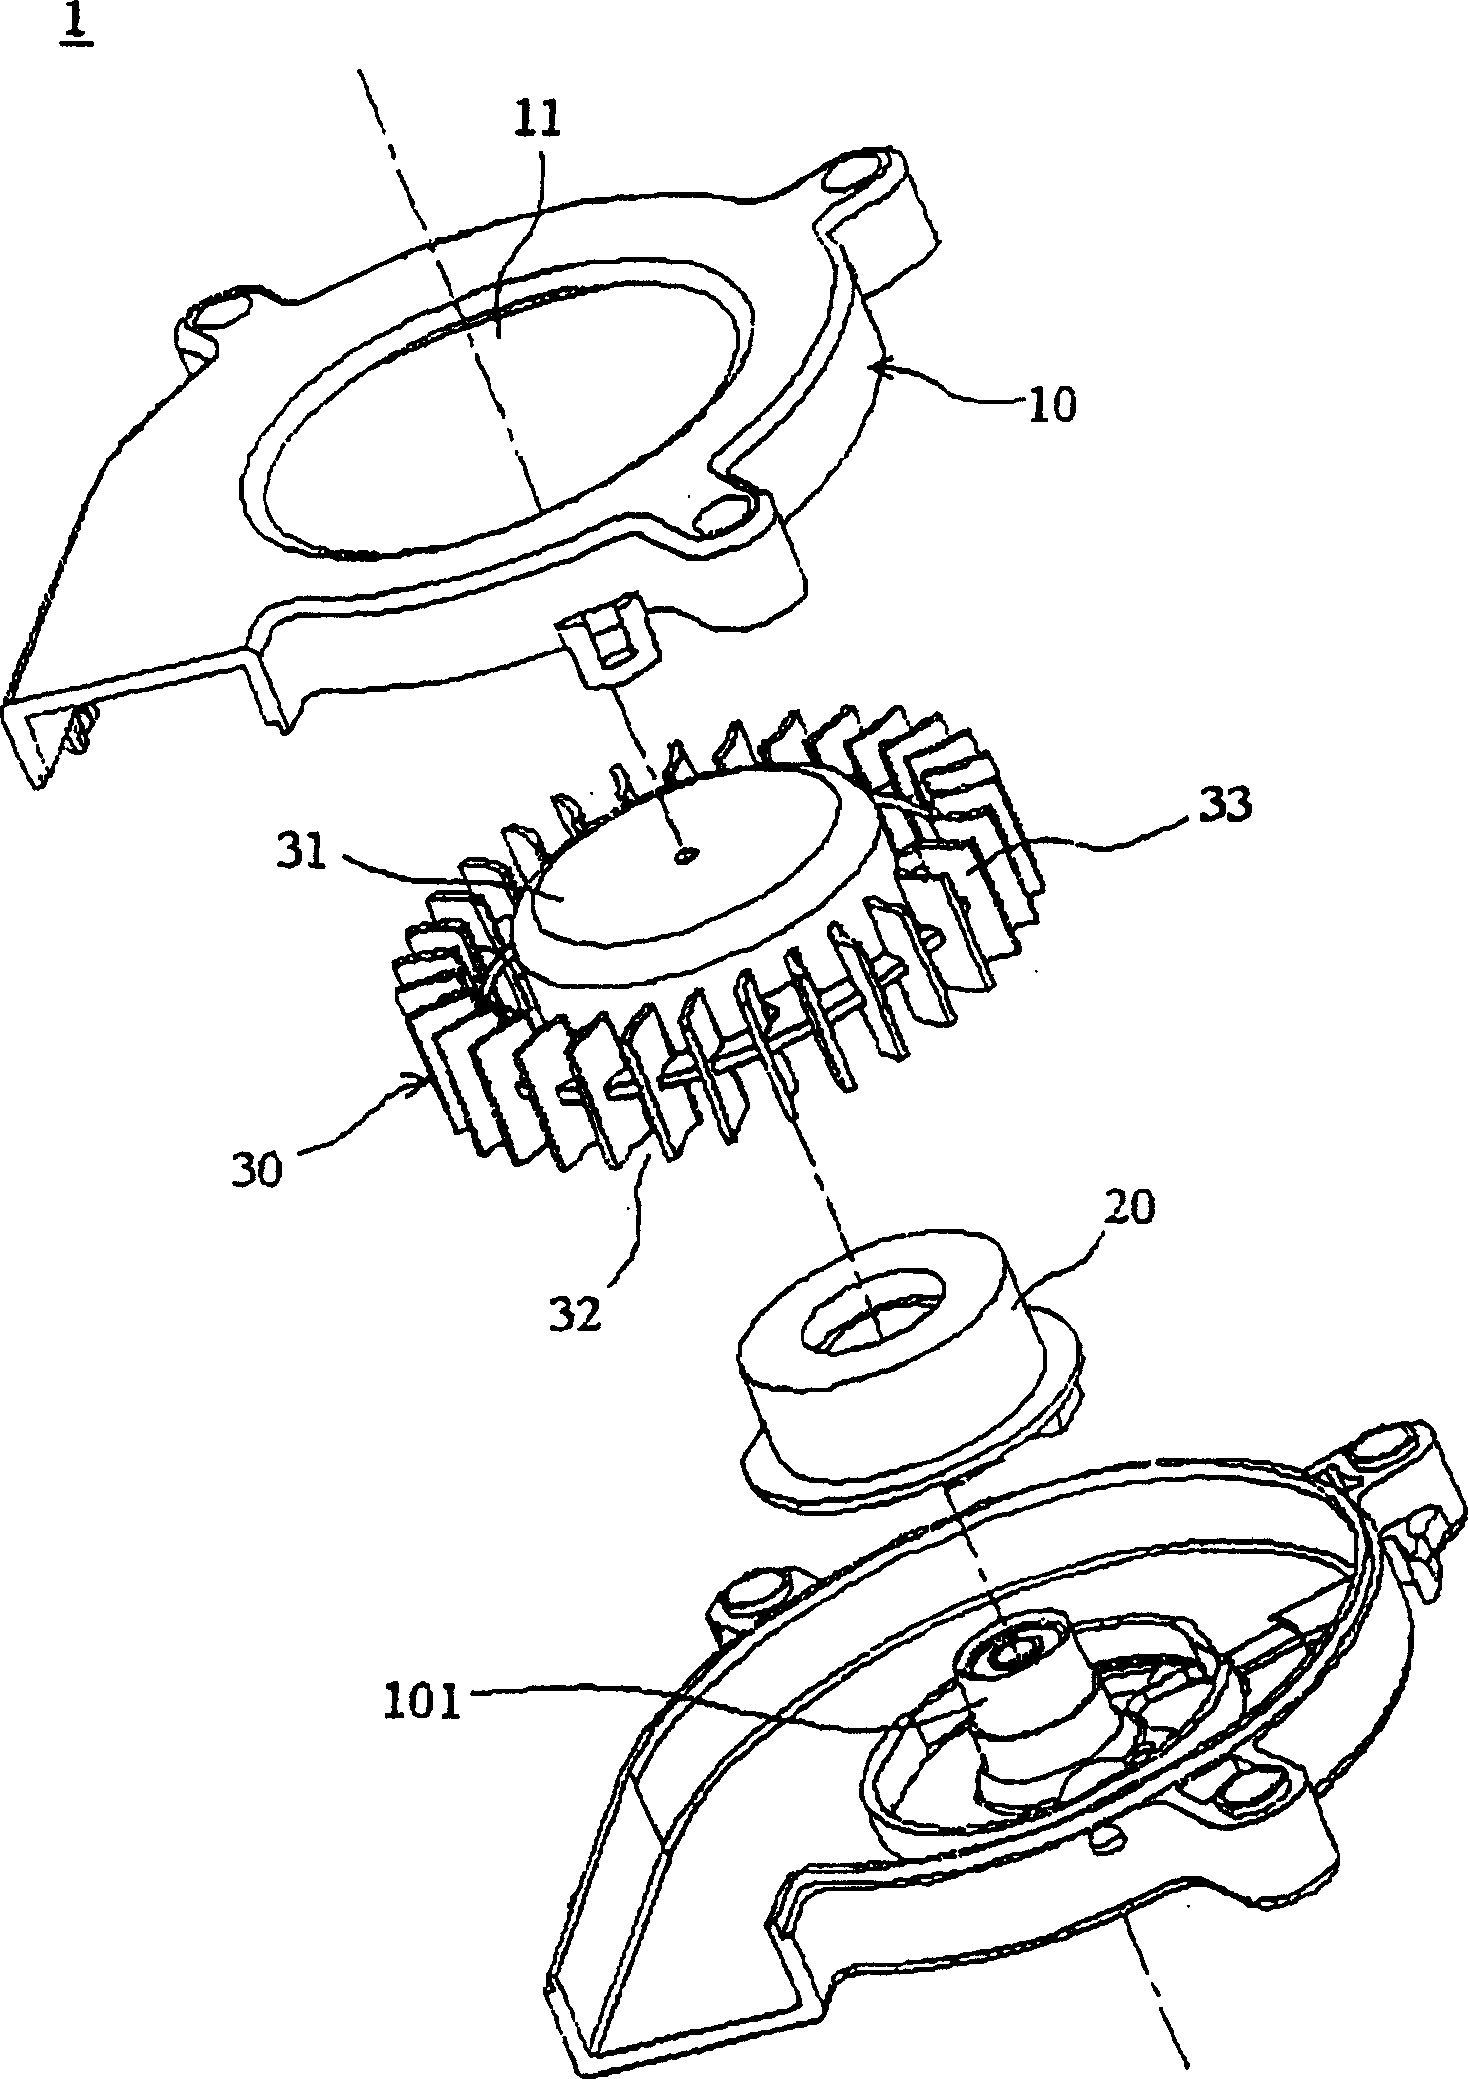 Centrifugal fan and its frame structure